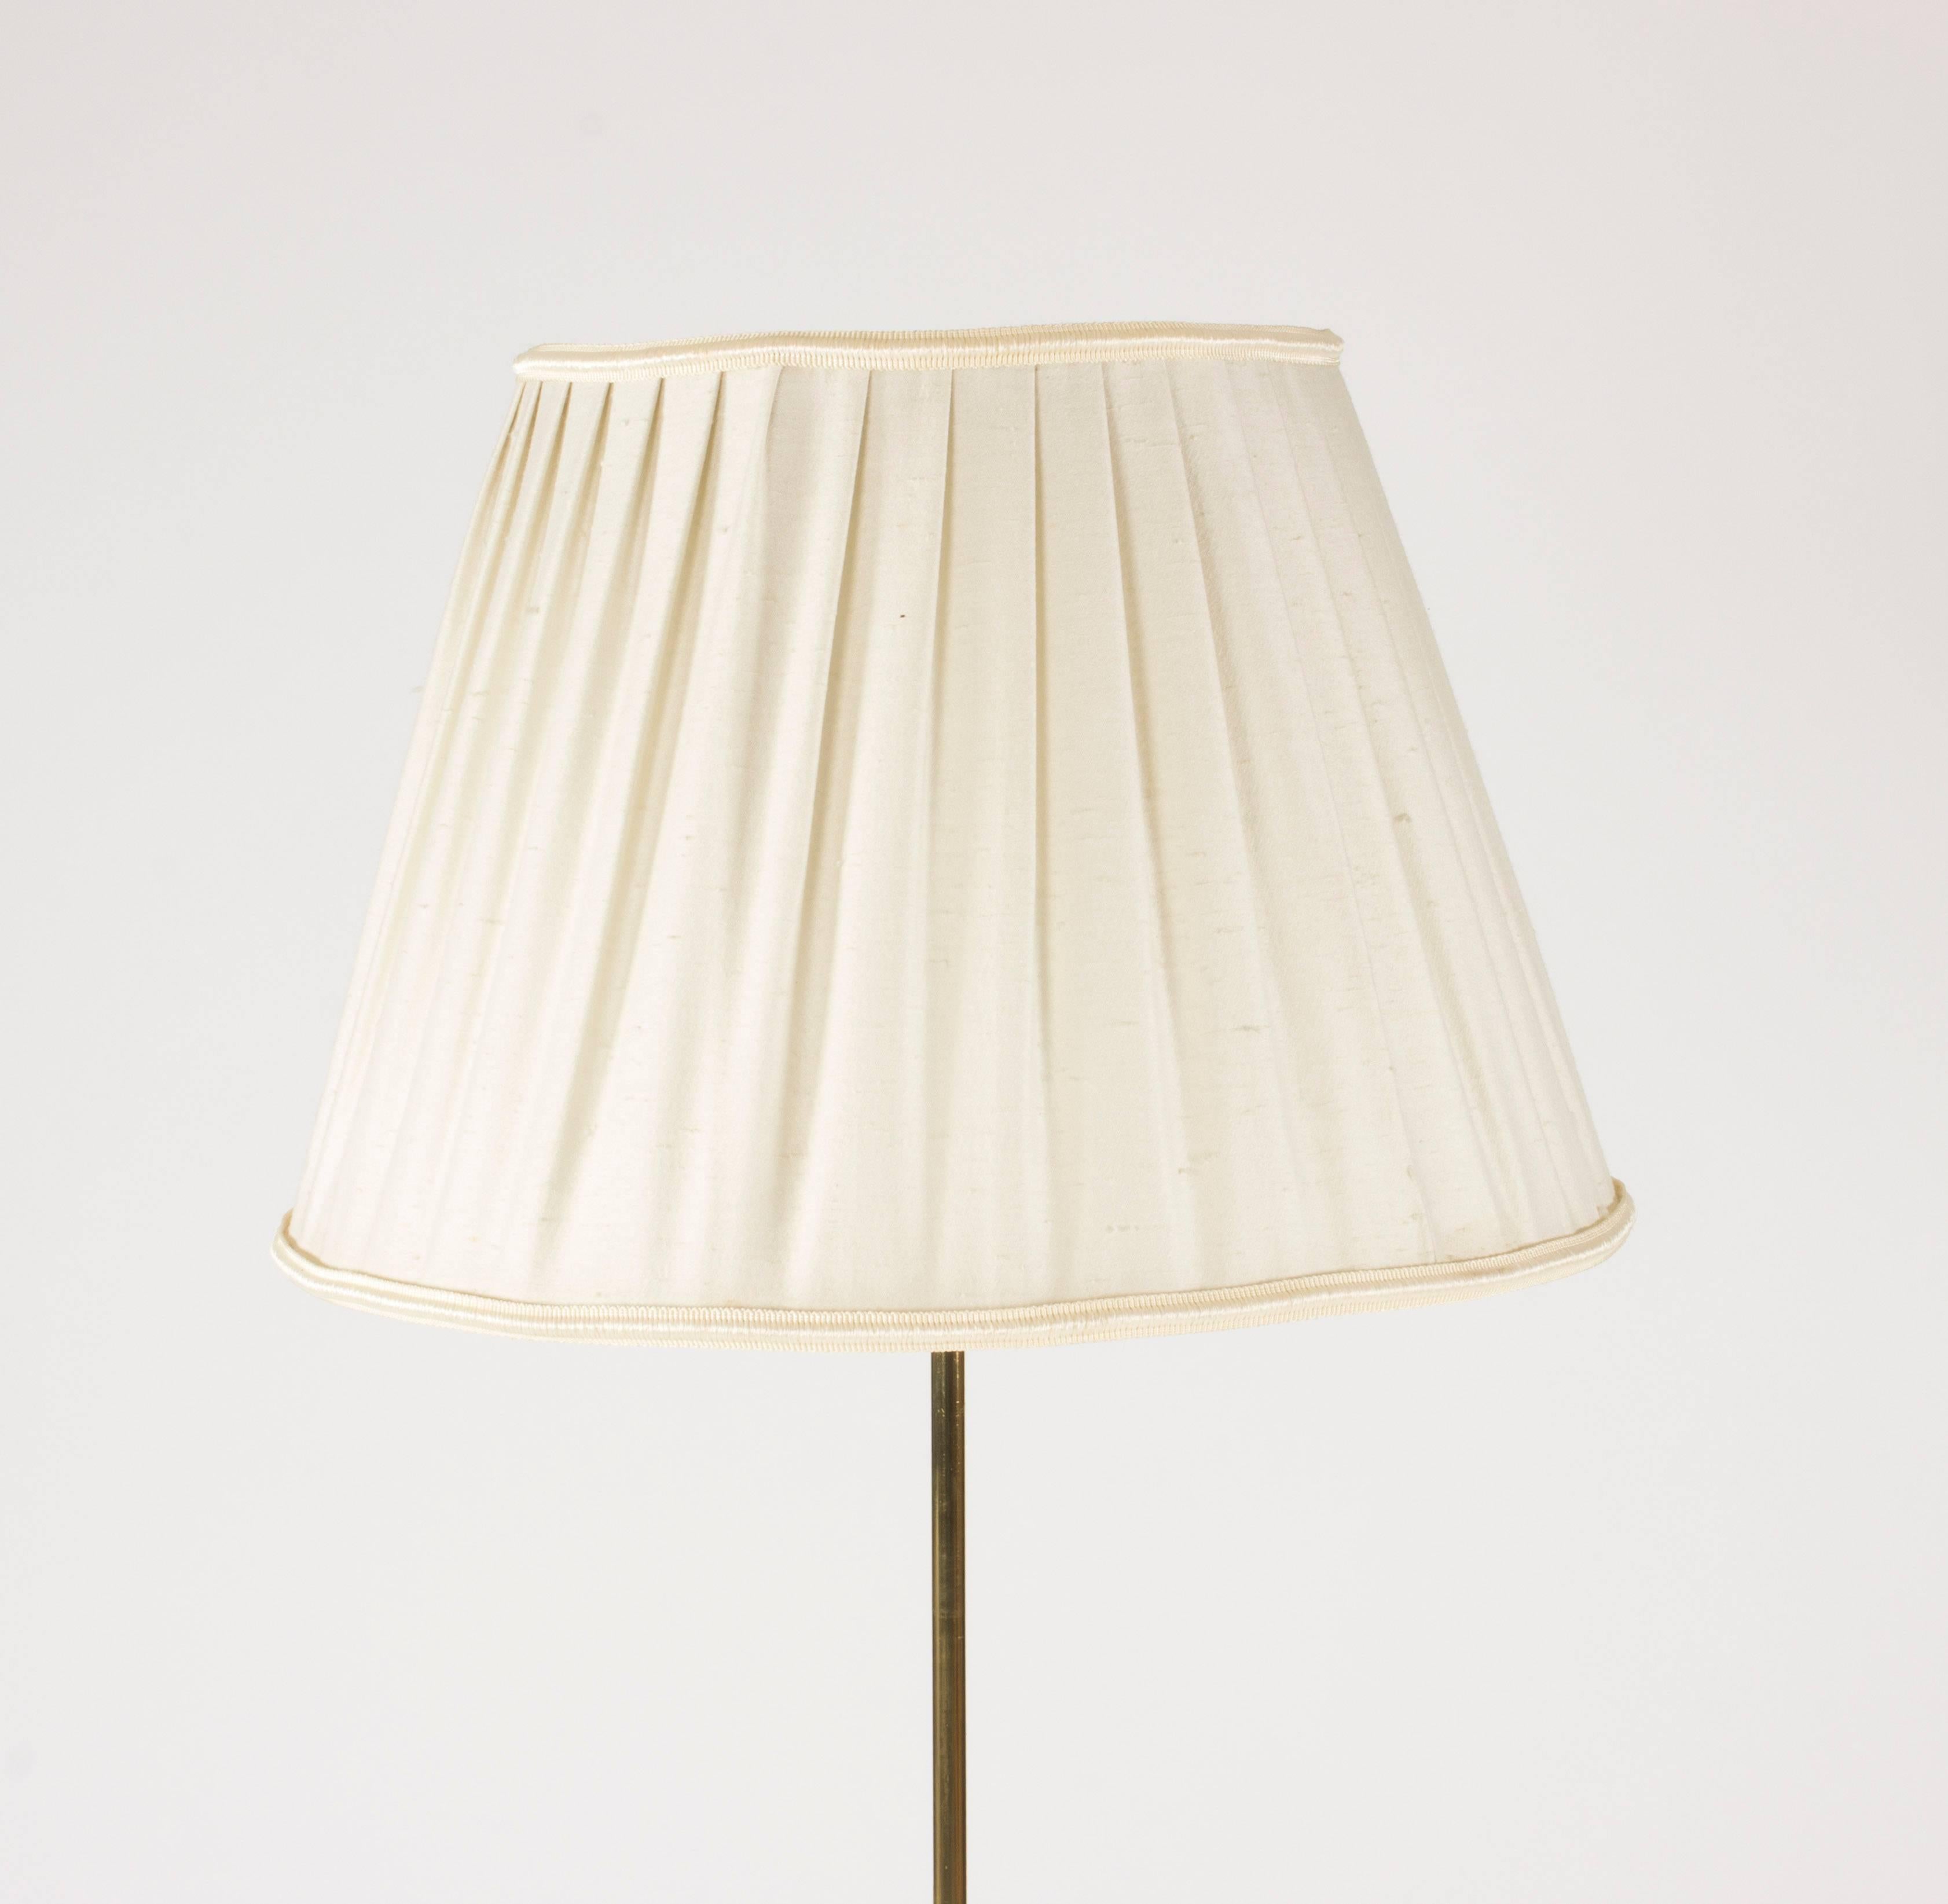 Scandinavian Modern Brass and Leather Floor Lamp with Adjustable Height from NK